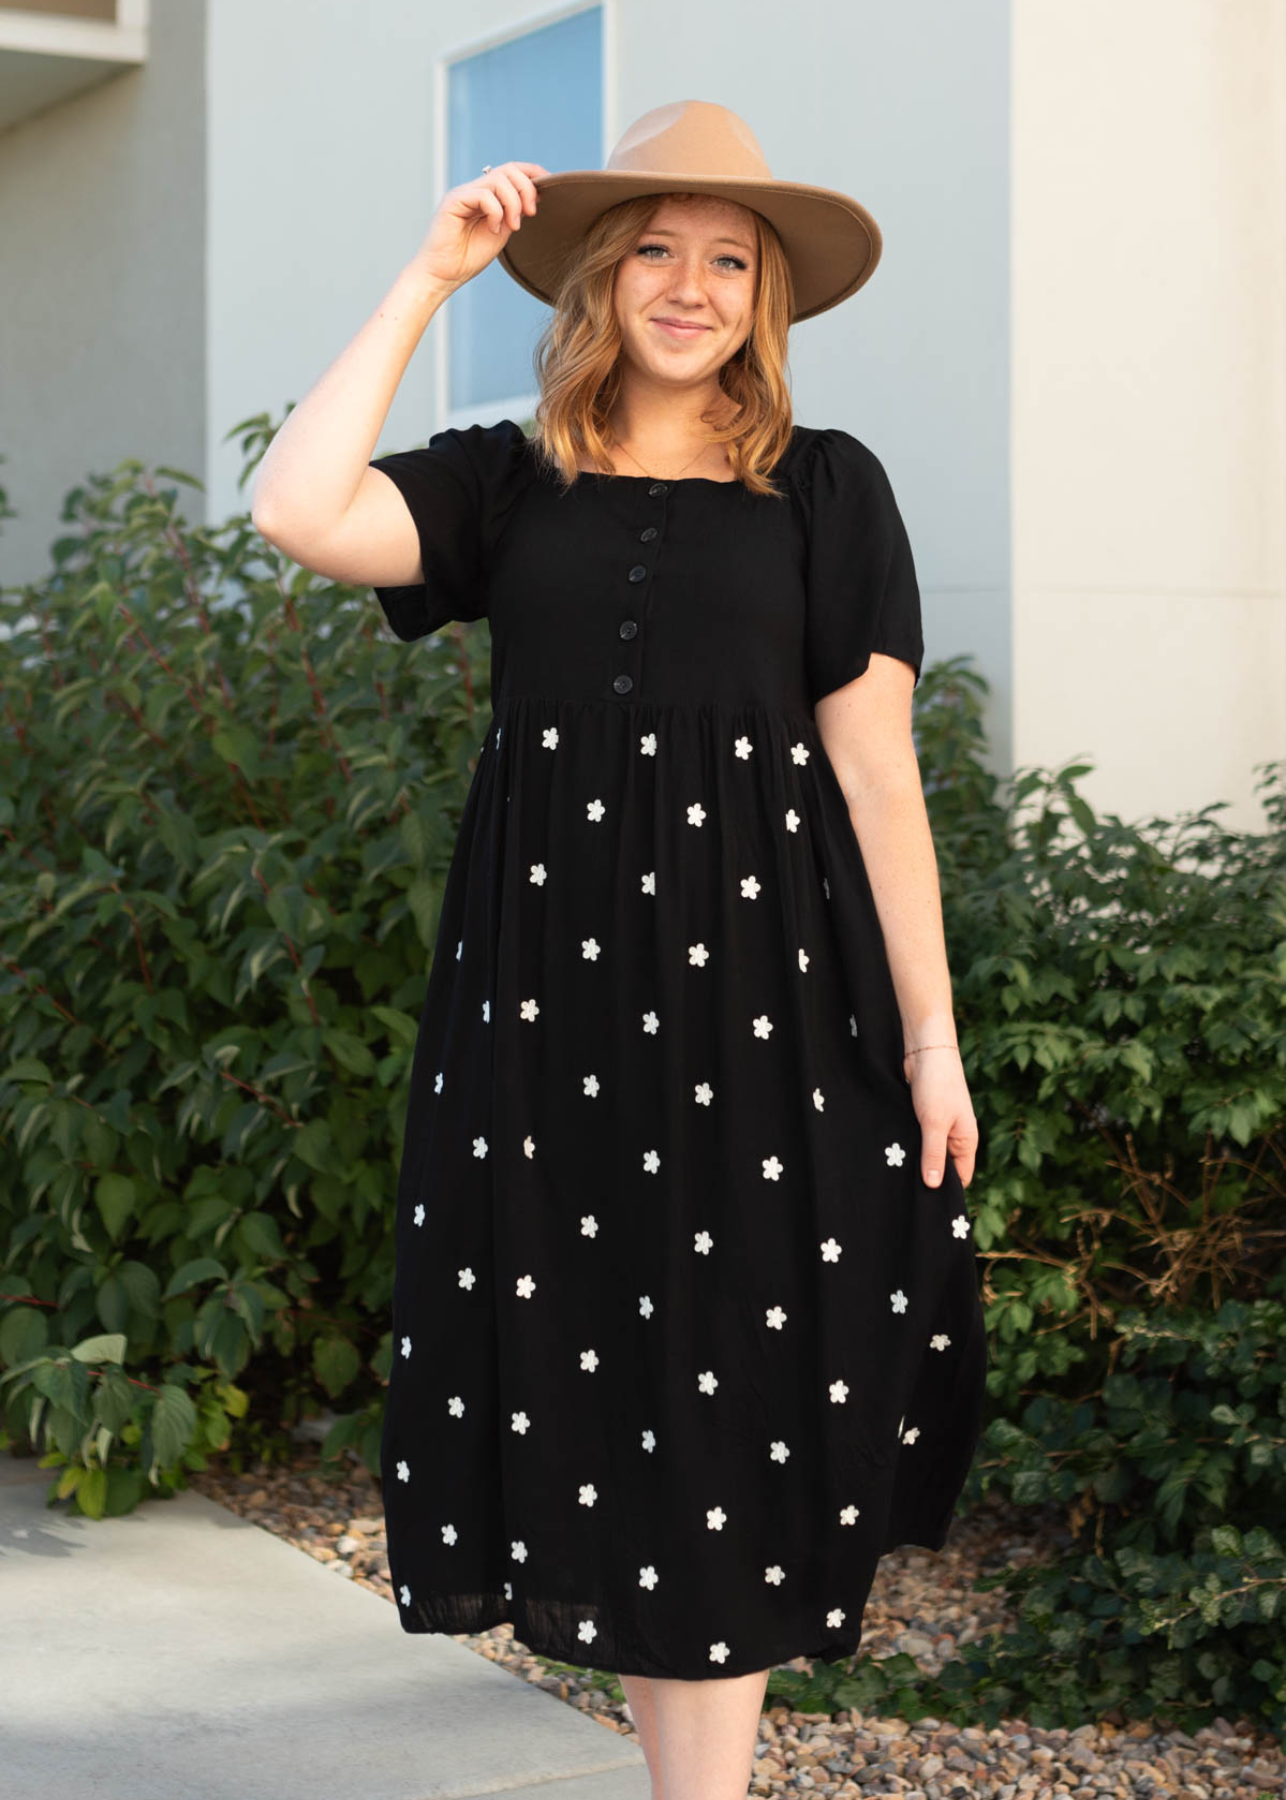 Short sleeve black dress with buttons on the bodice and small white flowers on the skirt